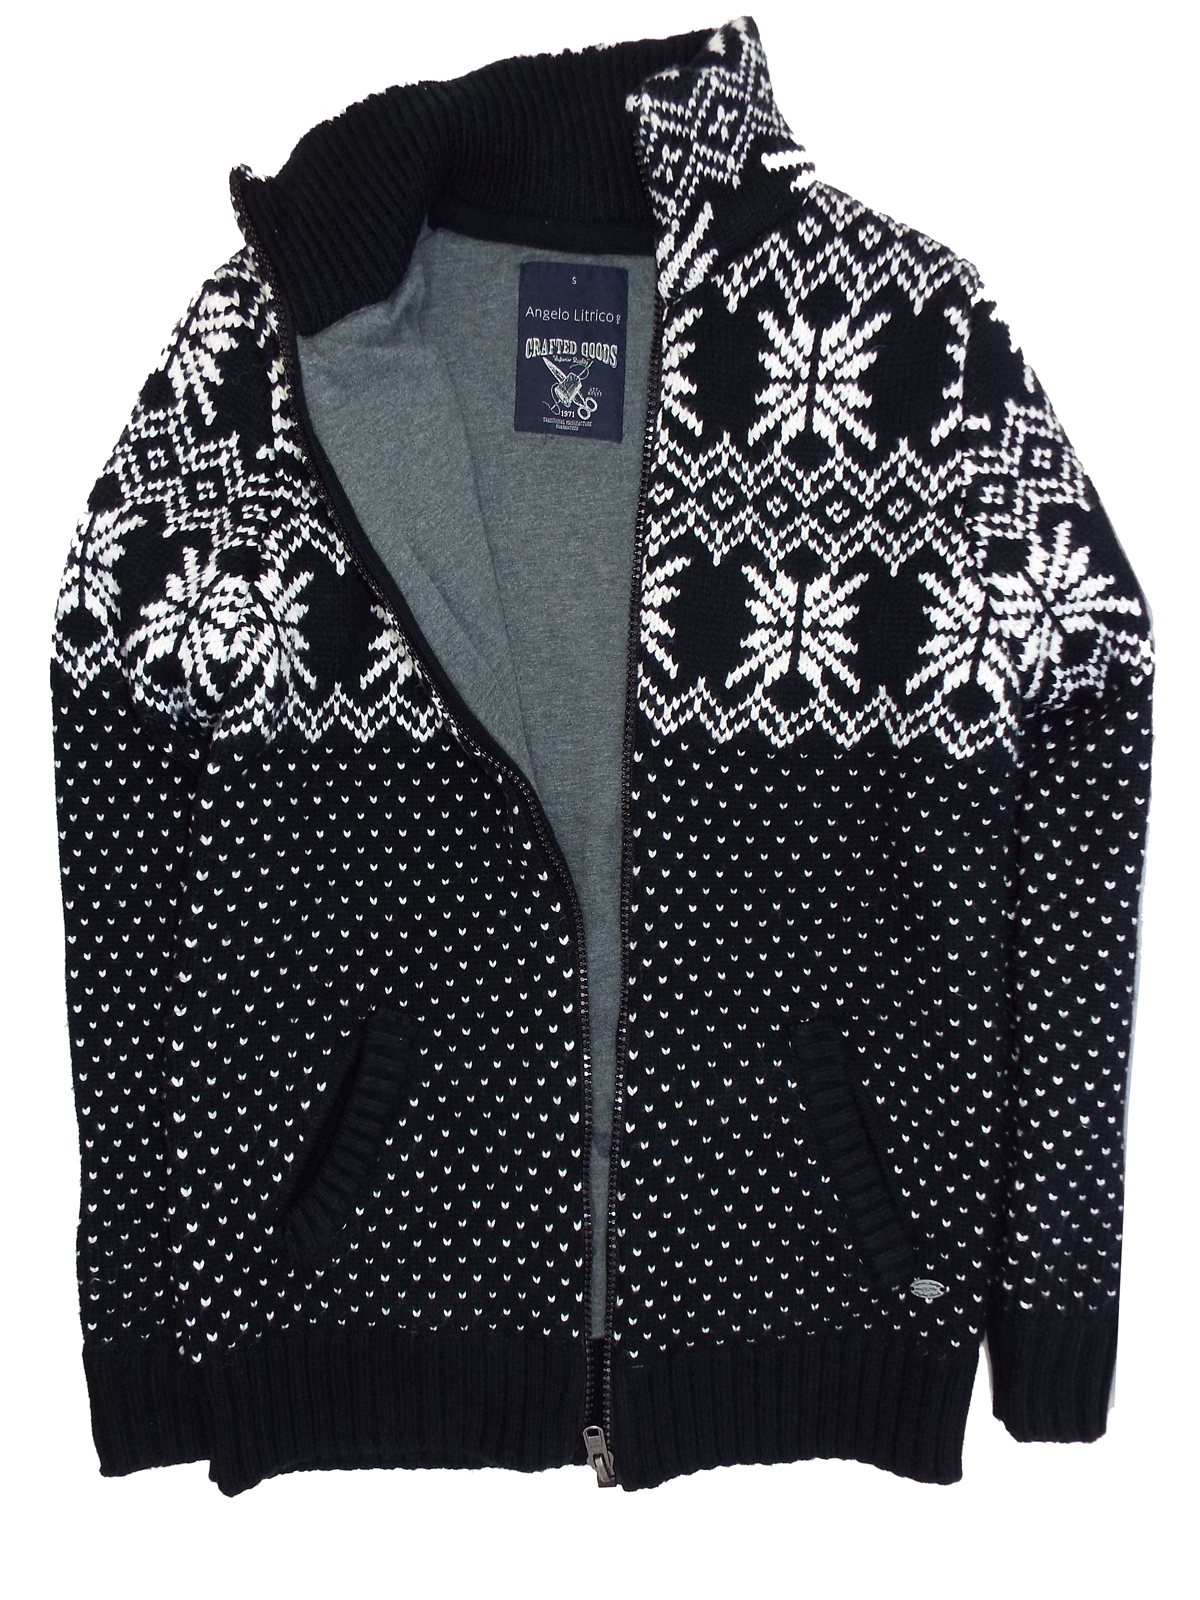 C&A - - BLACK Knitted Fairisle Zip Through Cardigan with Wool - Size ...